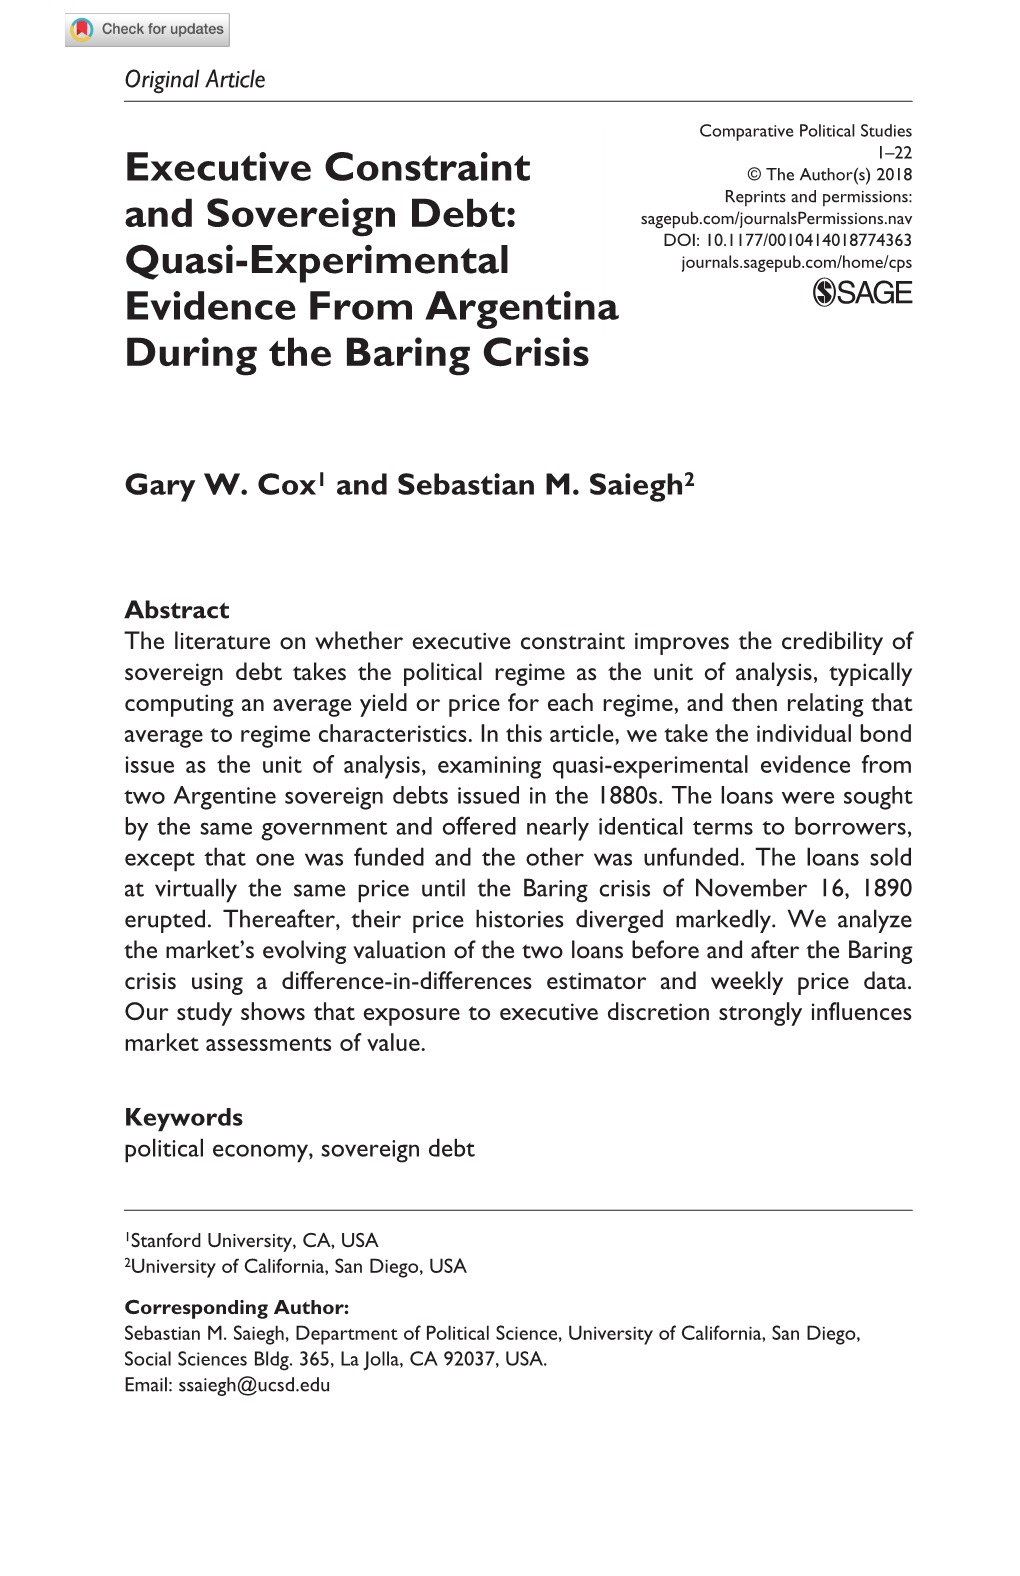 Executive Constraint and Sovereign Debt: Quasi-Experimental Evidence from Argentina During the Baring Crisis